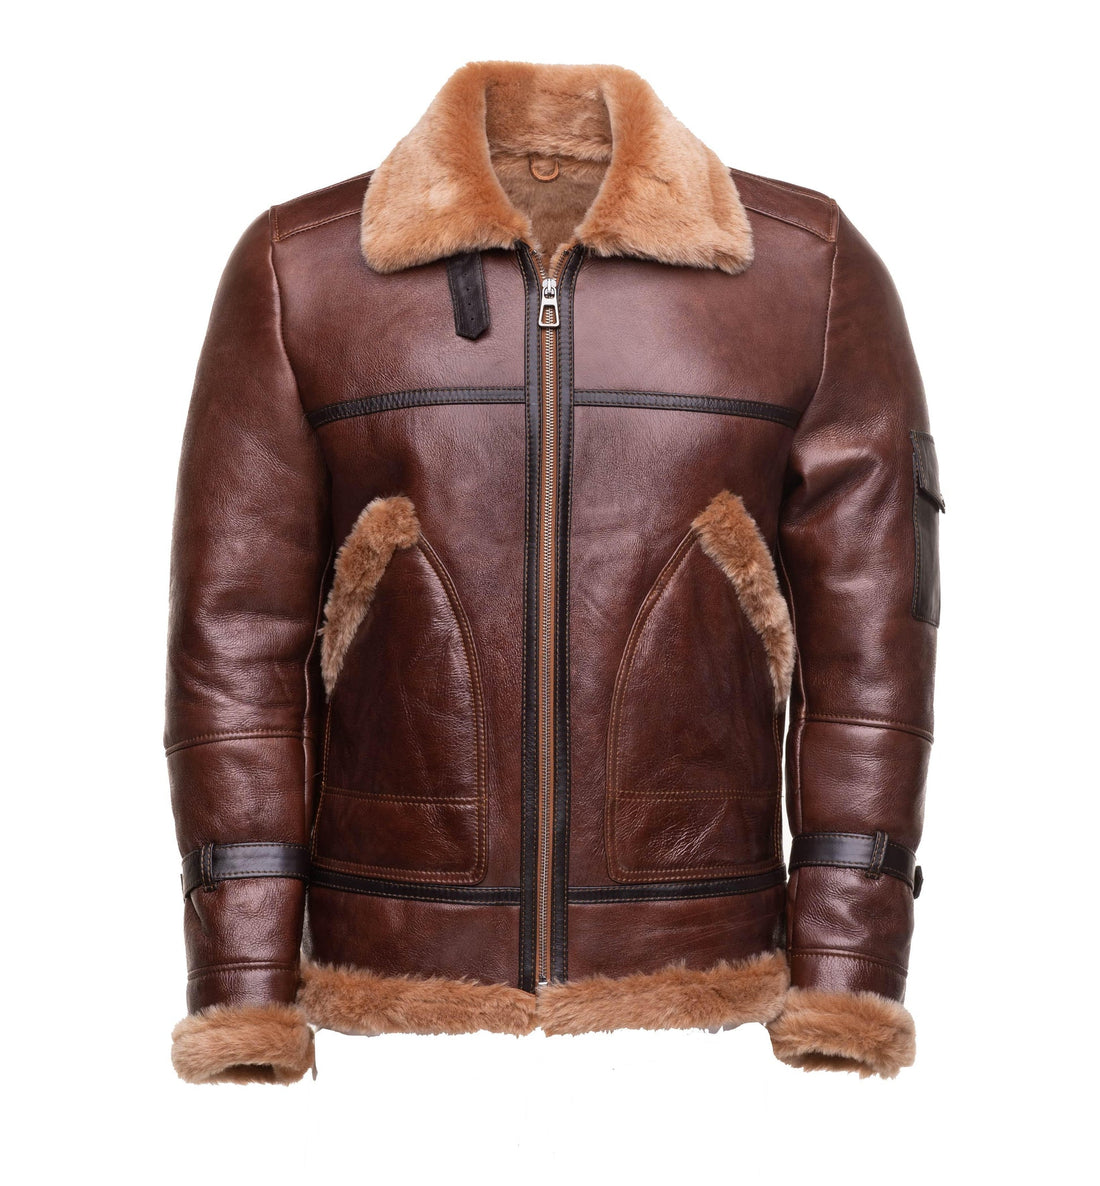 The History of the B3 Bomber Shearling Jacket